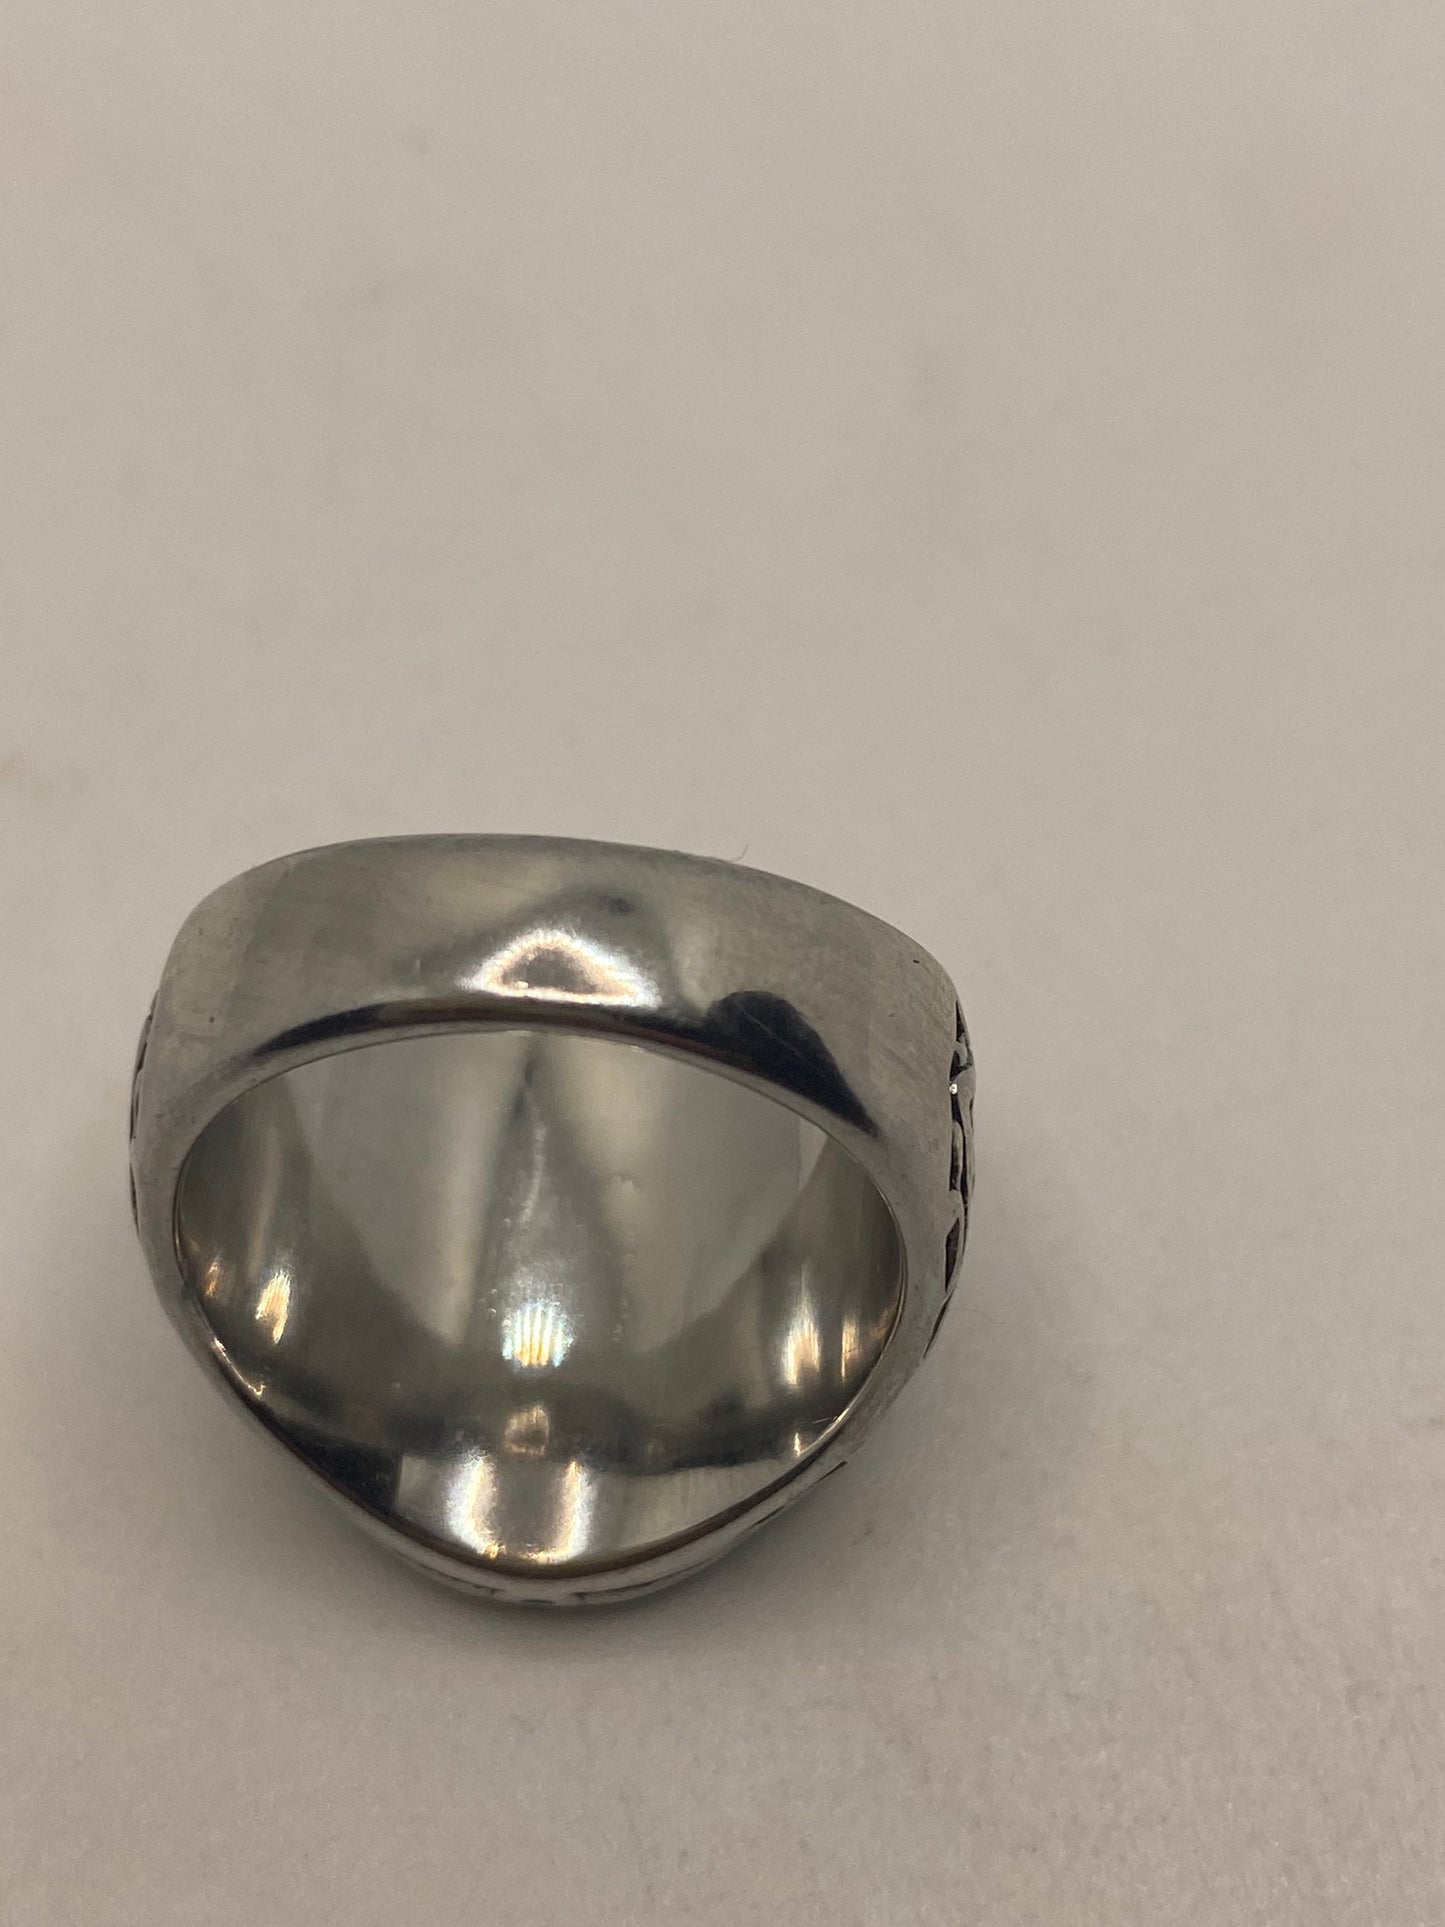 Vintage Silver Stainless Steel Hand of Fatima Mens Ring